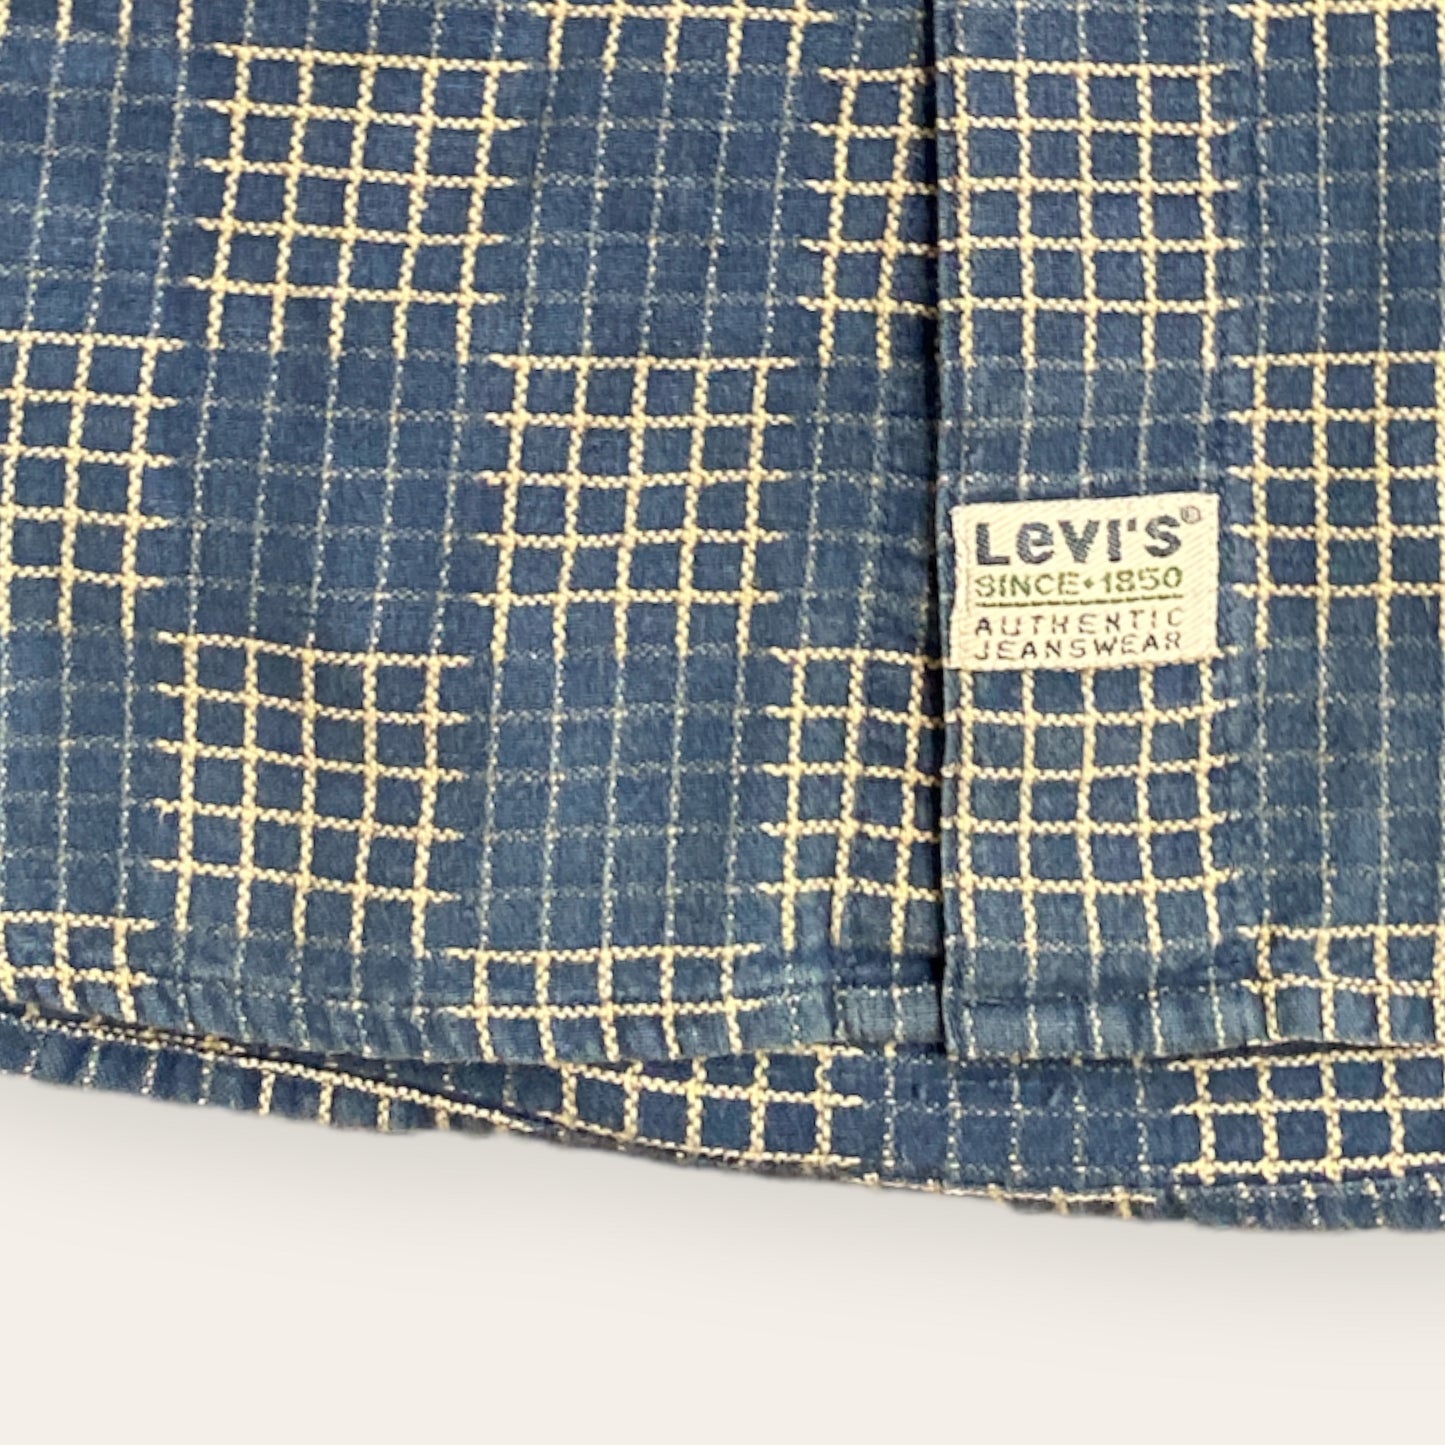 Vintage Levi's Button Up Collared Shirt Size L